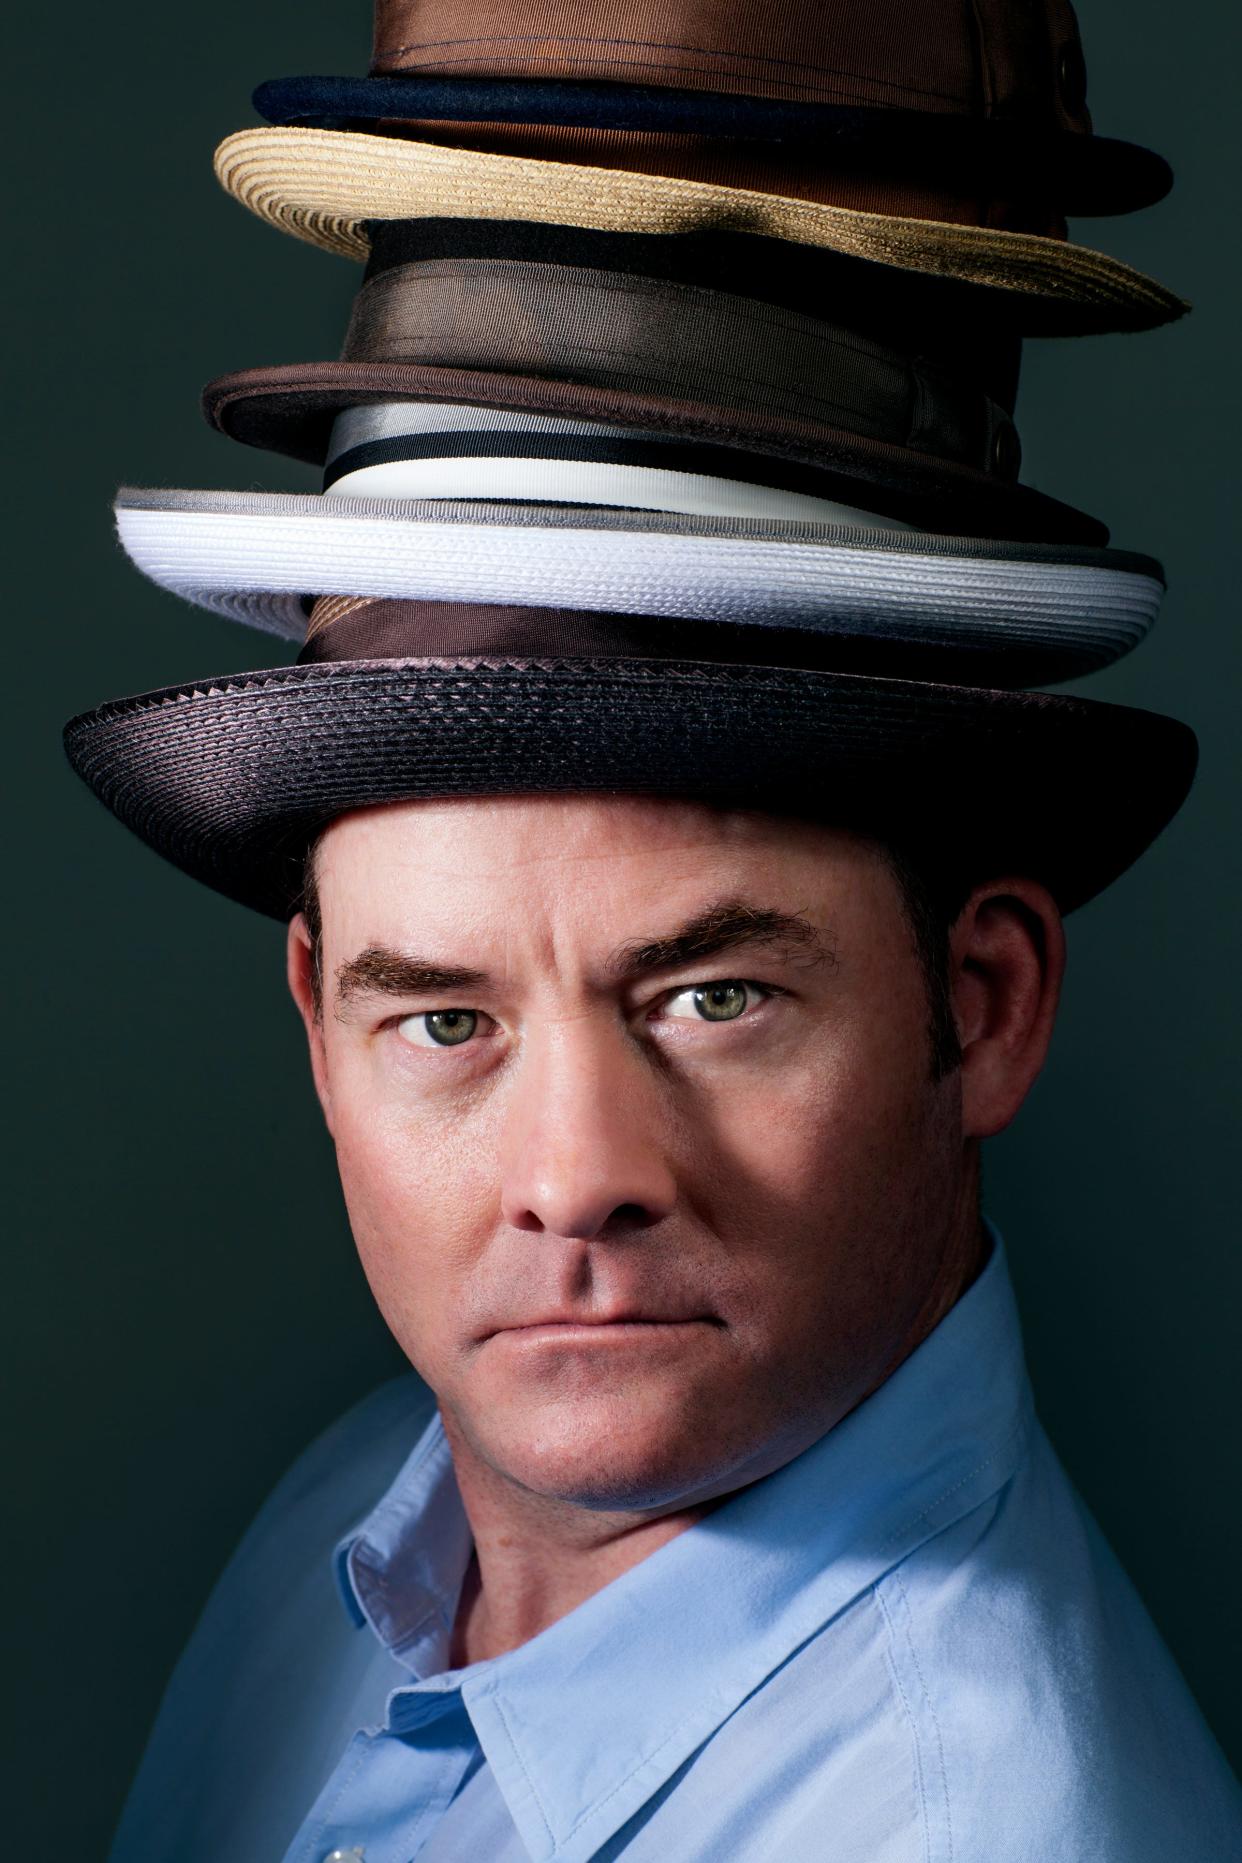 Actor, comedian and producer David Koechner wears many hats.